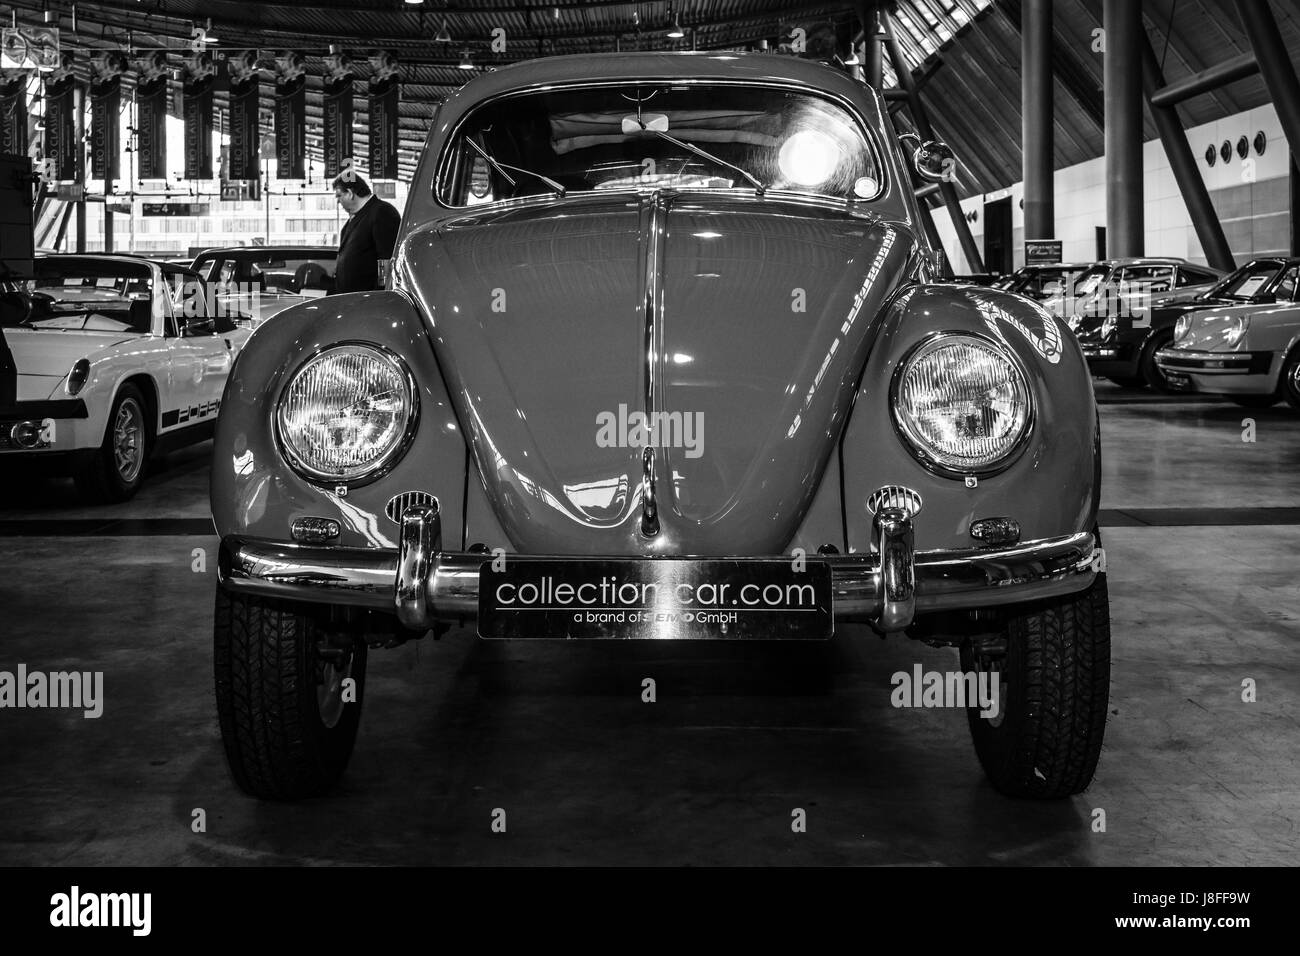 STUTTGART, GERMANY - MARCH 04, 2017: Subcompact Volkswagen Beetle, 1973. Black and white. Europe's greatest classic car exhibition 'RETRO CLASSICS' Stock Photo